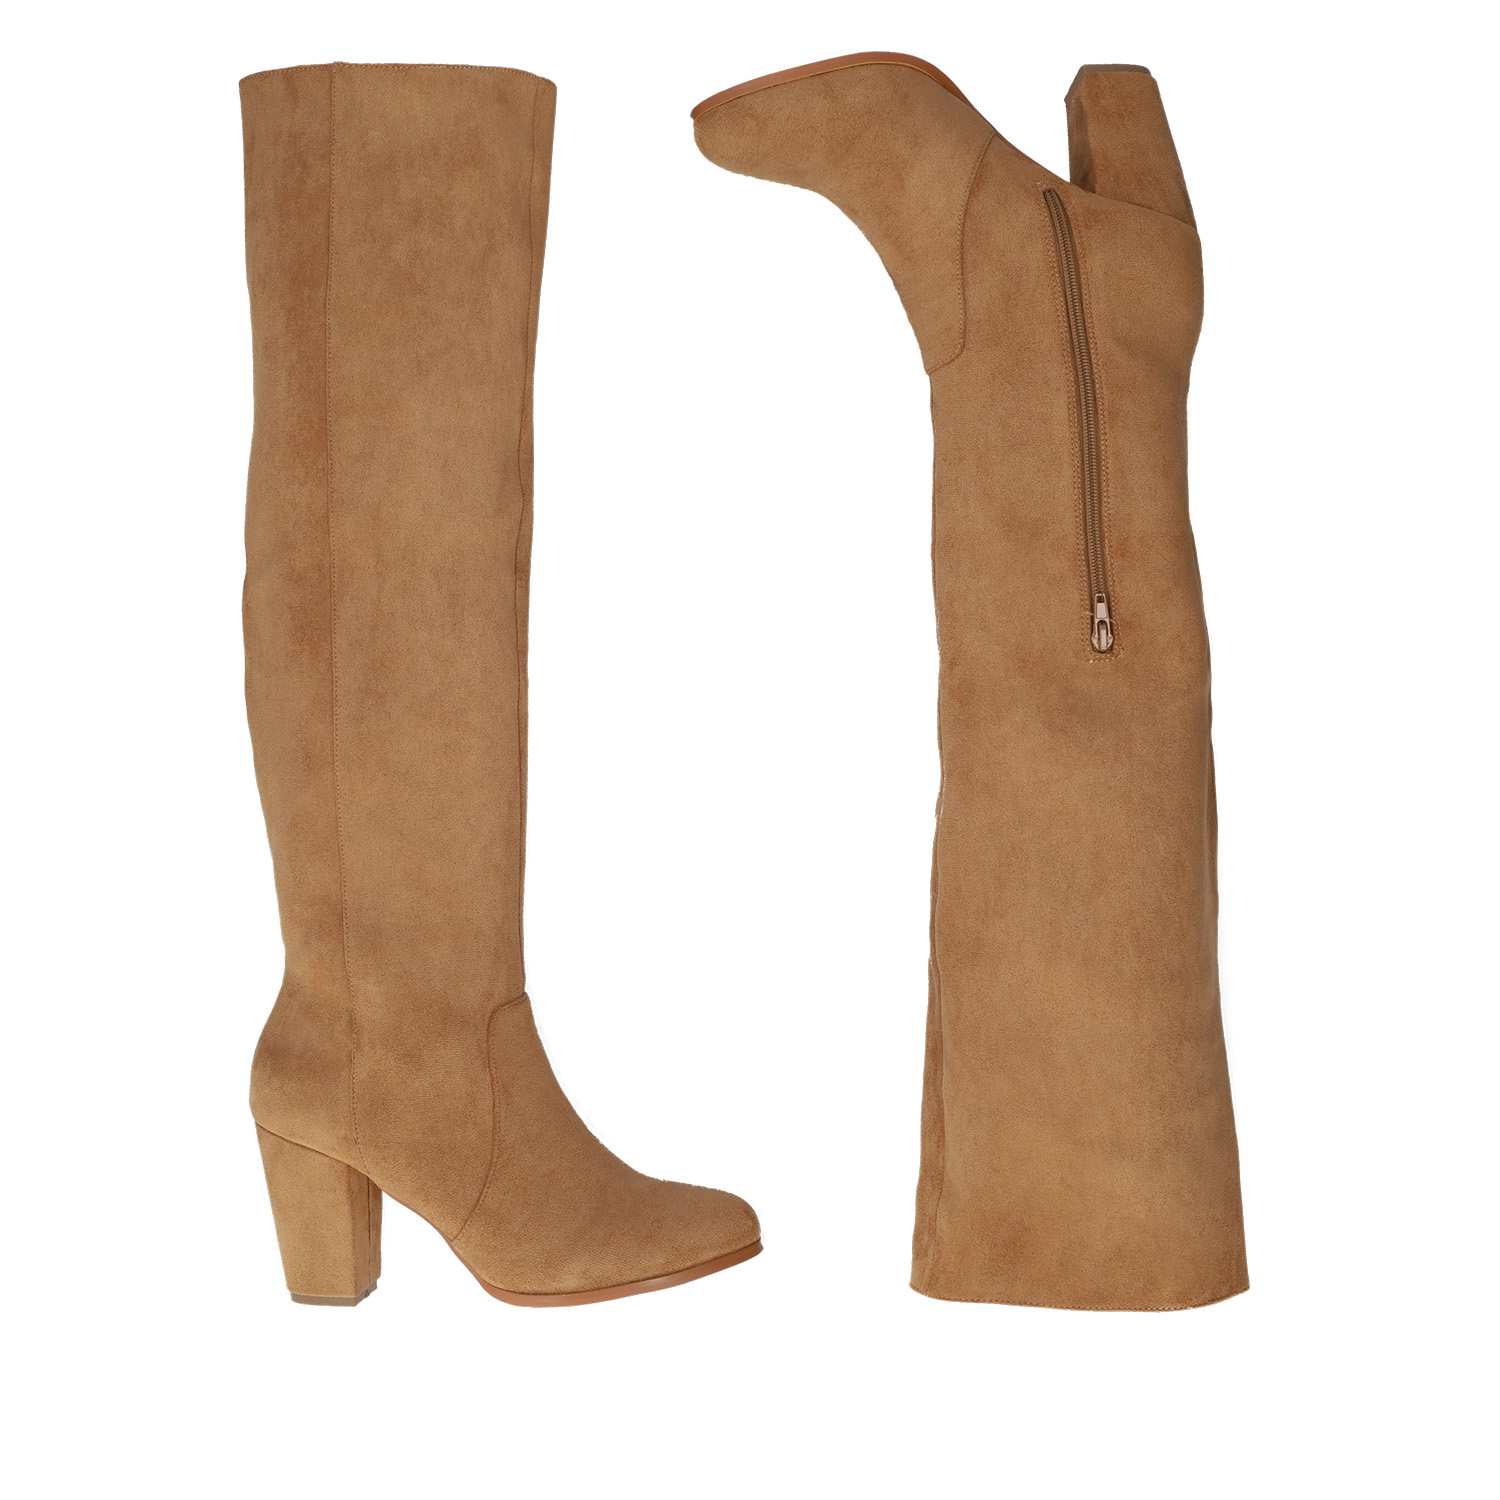 Heeled knee-high boots in brown faux suede. 